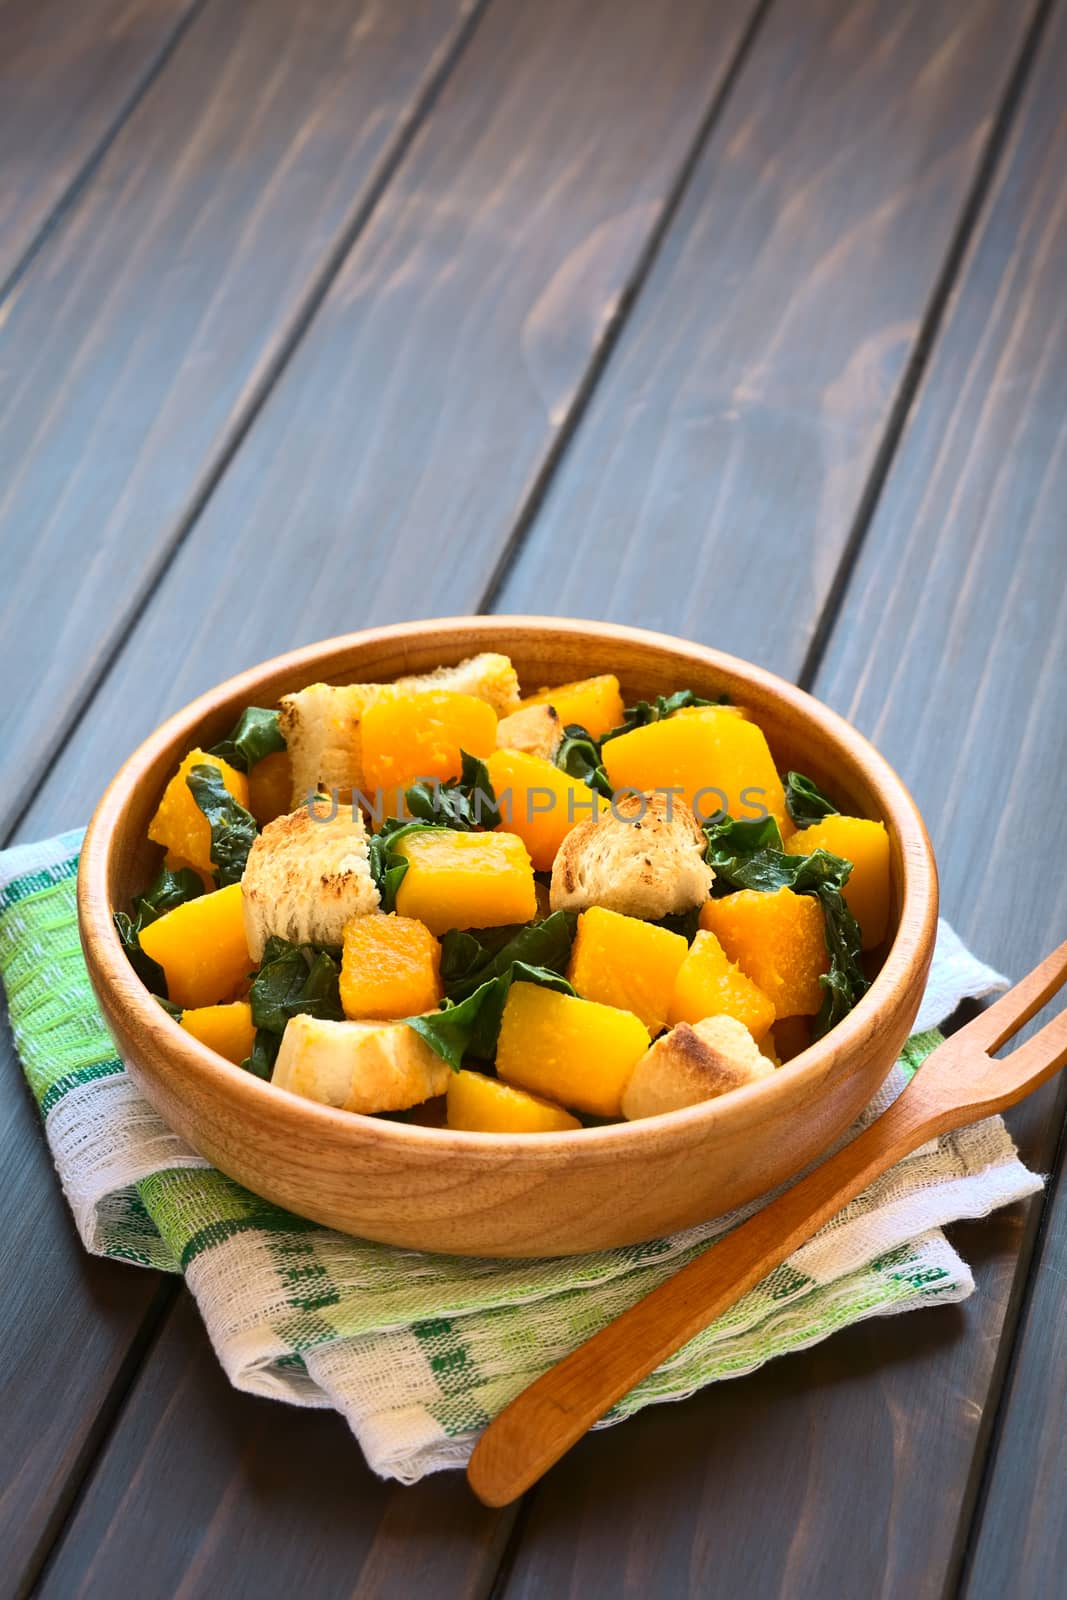 Pumpkin and chard salad with croutons served in wooden bowl, photographed on dark wood with natural light (Selective Focus, Focus in the middle of the salad) 